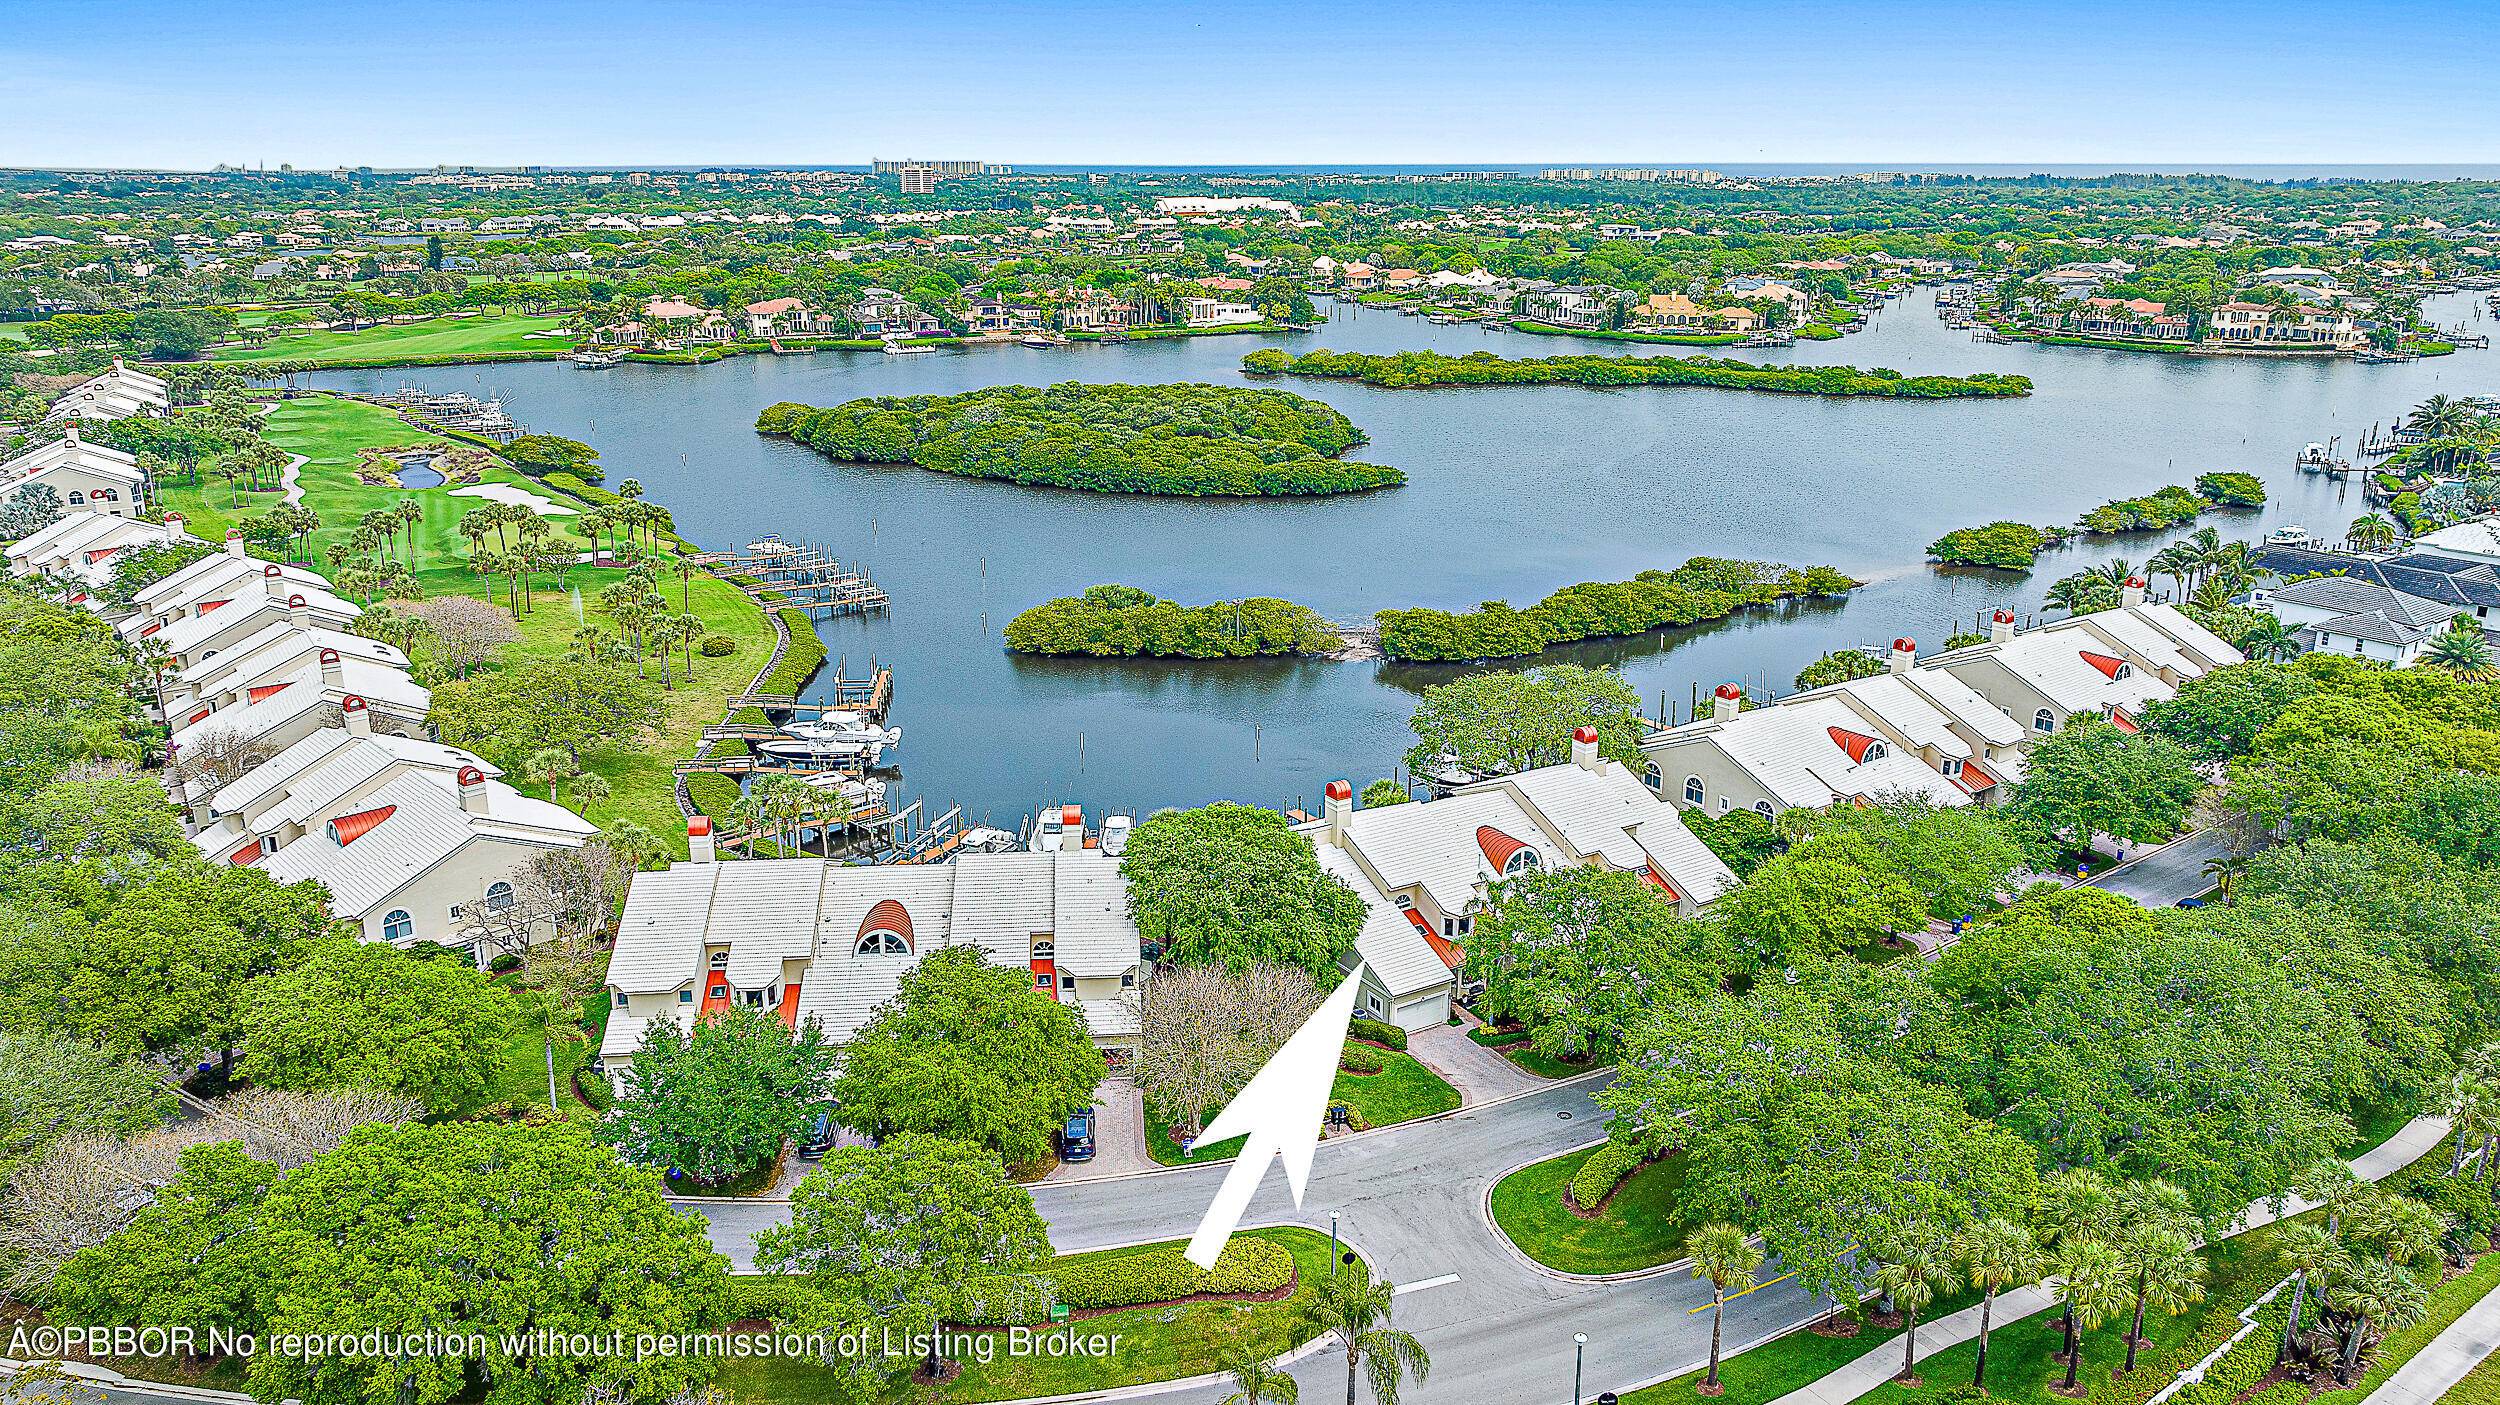 Welcome to your dream Harbor Home, with amazing views of the expansive waterways in Admirals Cove.